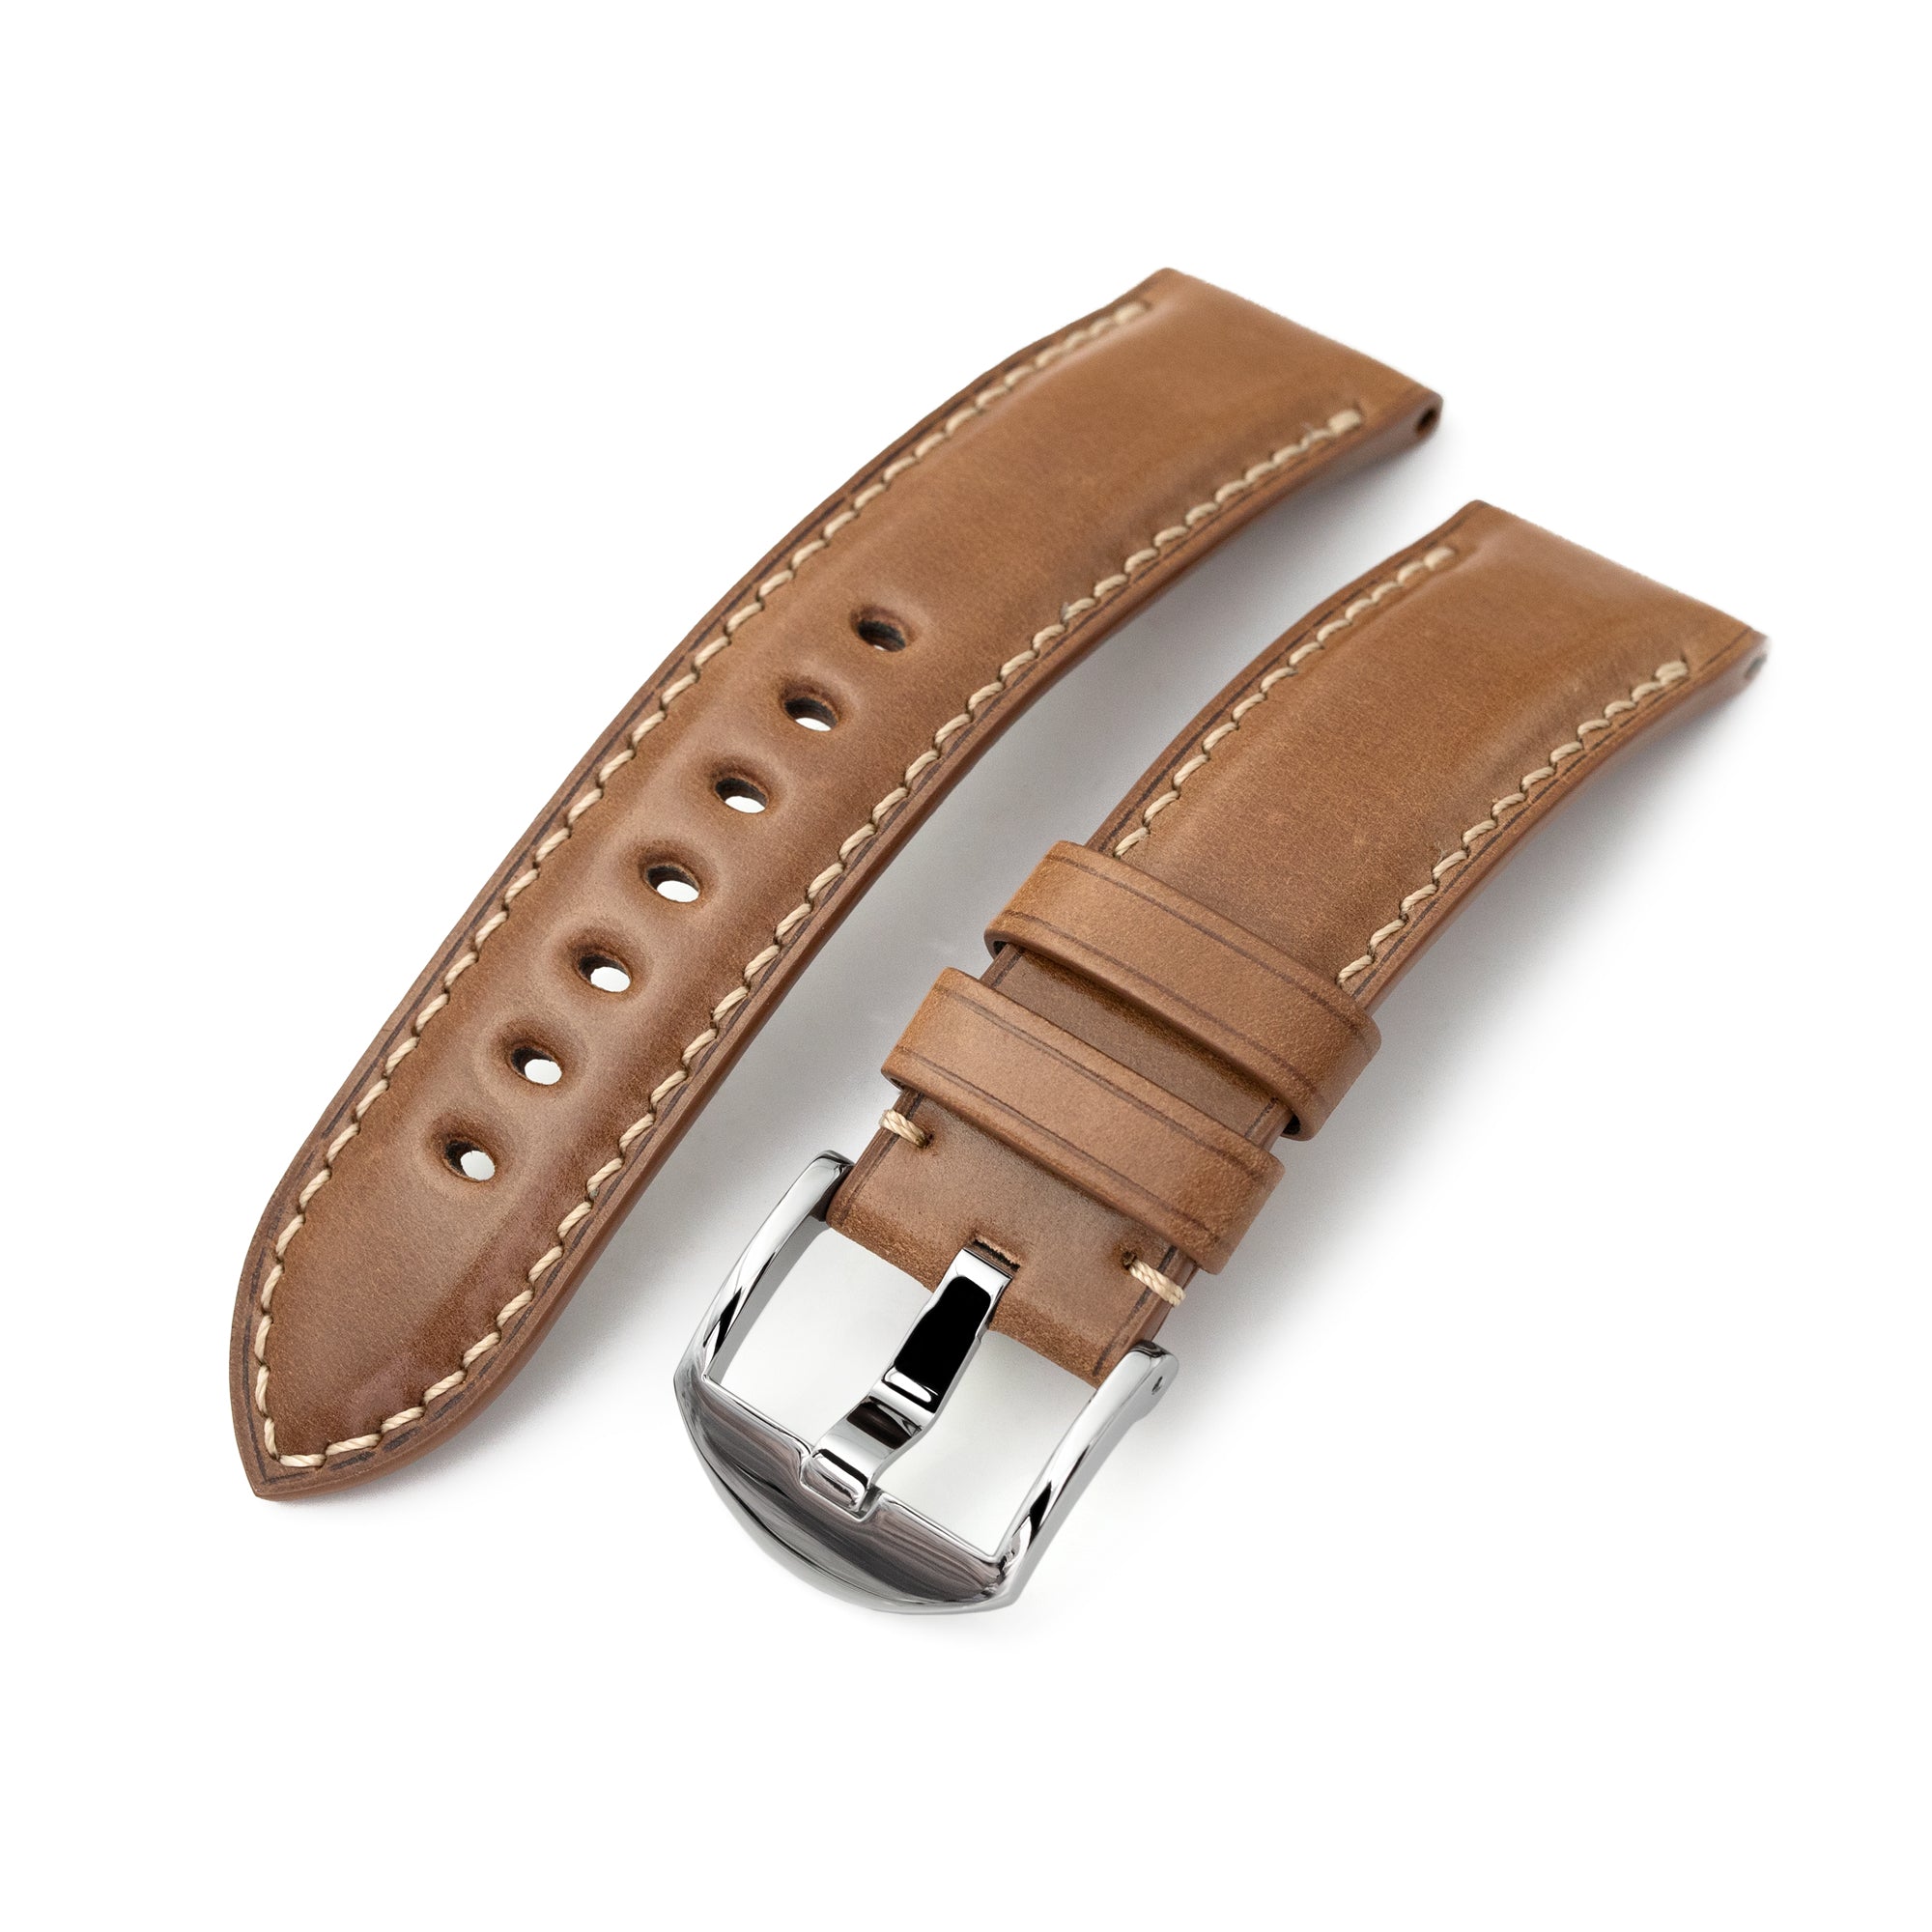 Pam Collection, Bourbon Horween Genuine Shell Cordovan Leather Watch Strap for Panerai, Beige Stitching Strapcode watch bands